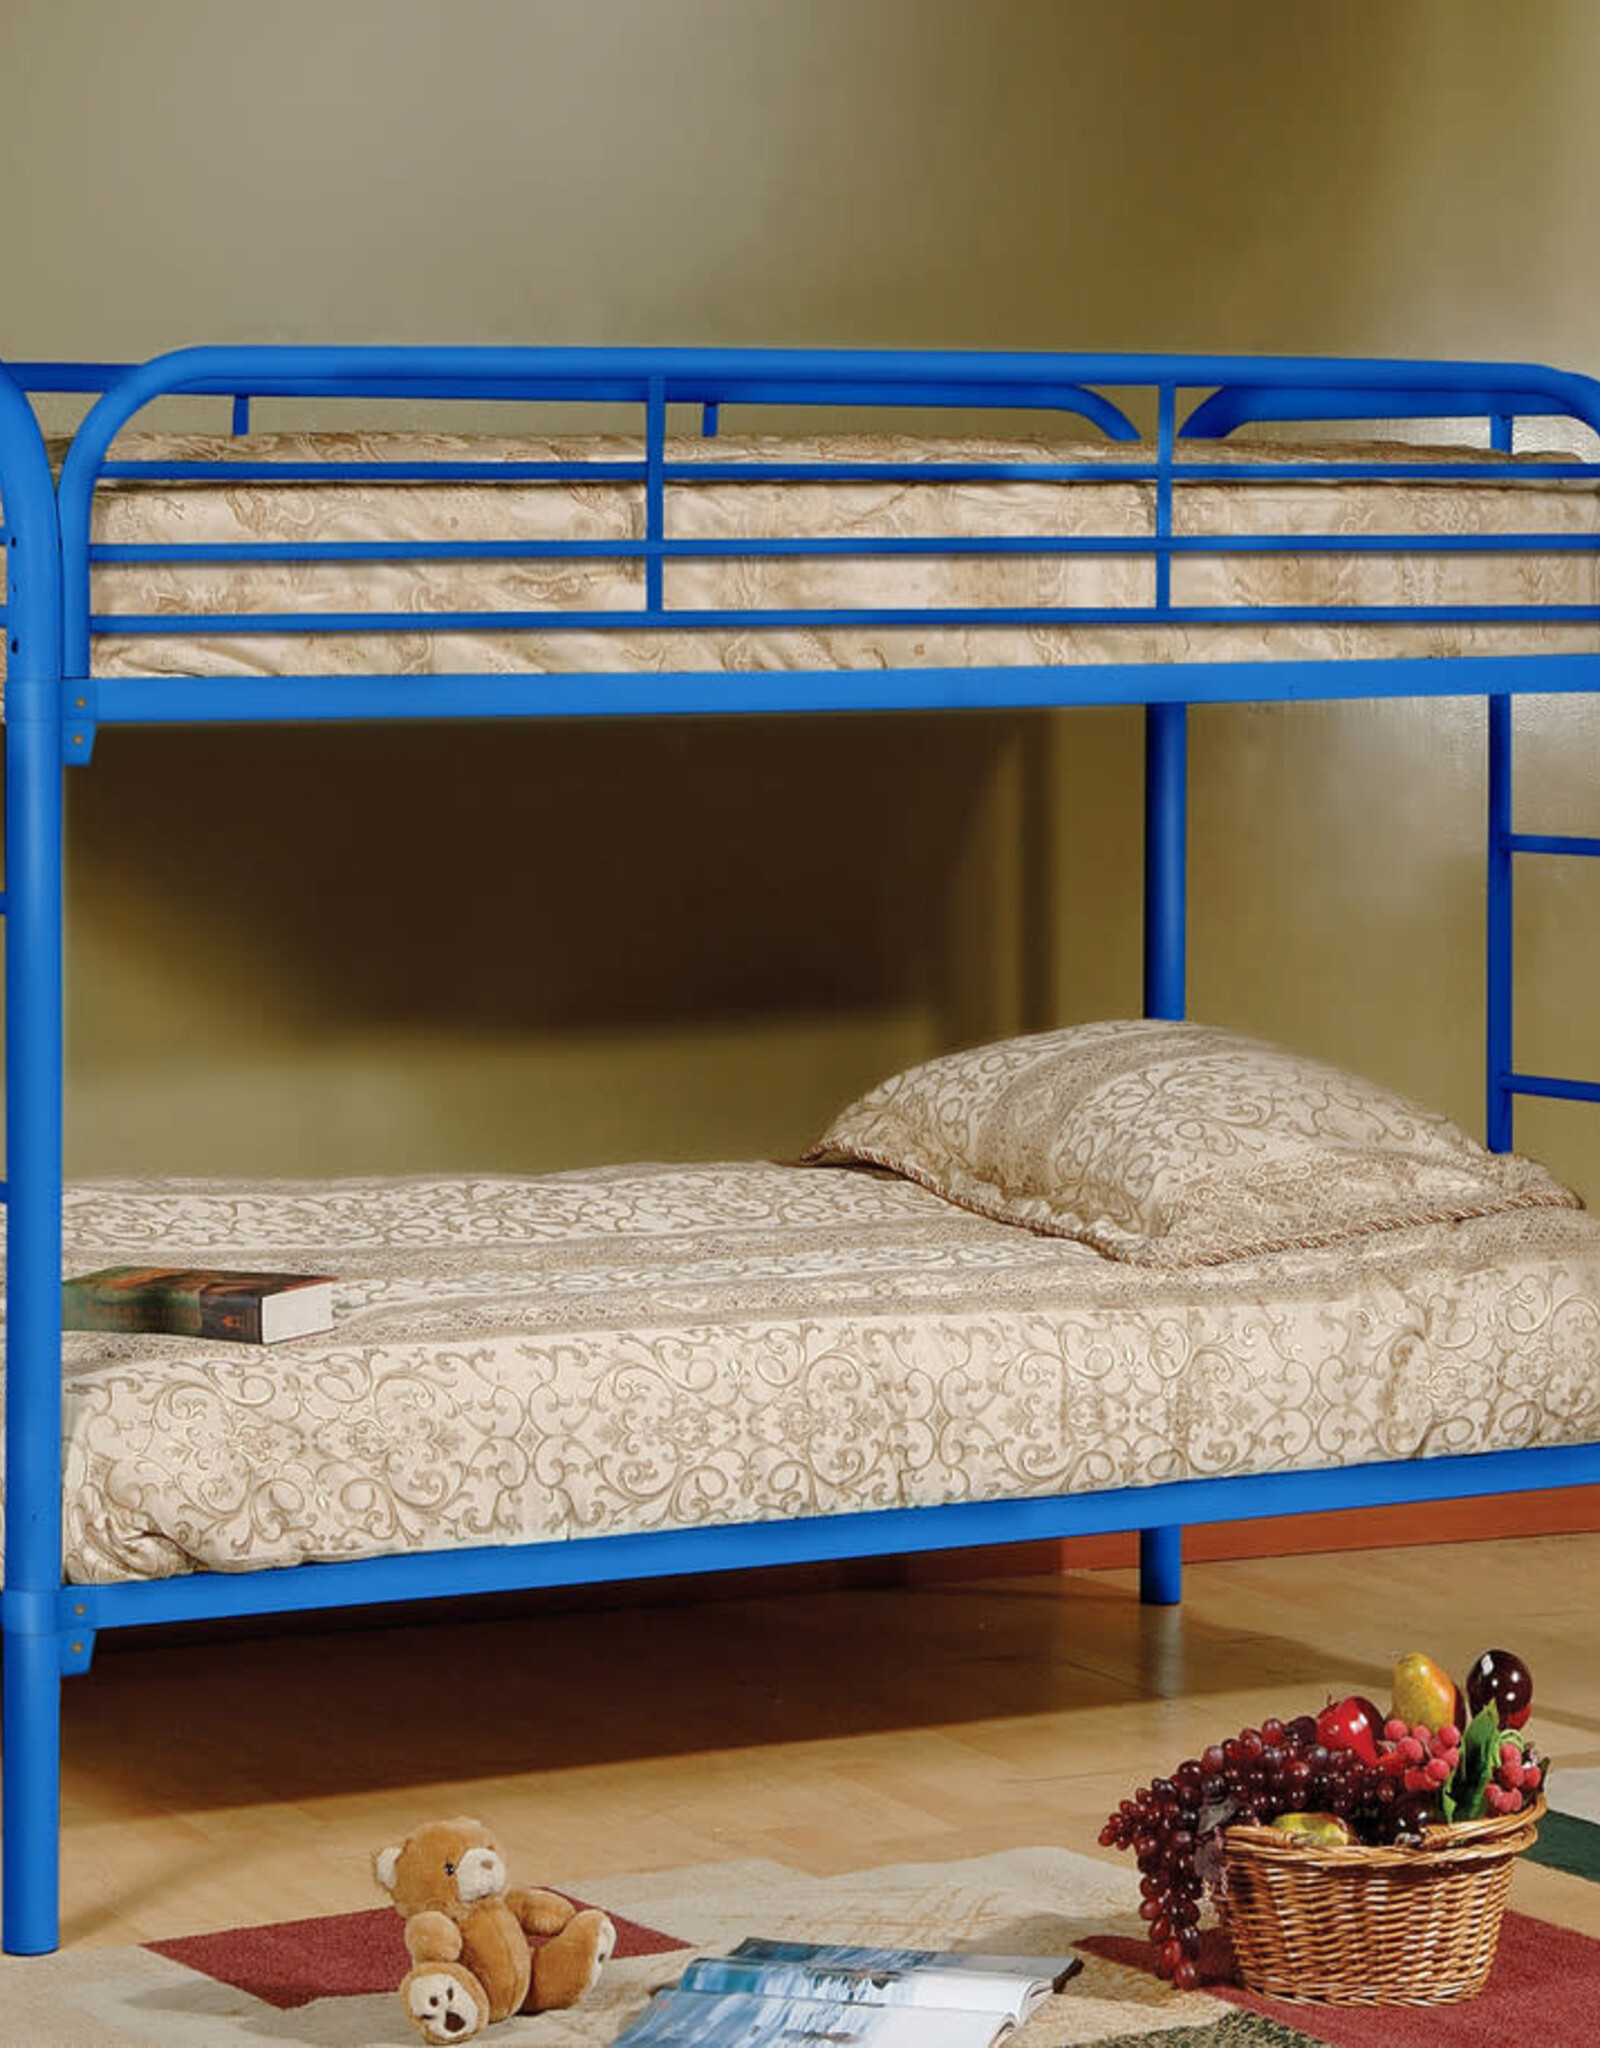 4501 Blue Twin/Twin Bunk-Bed